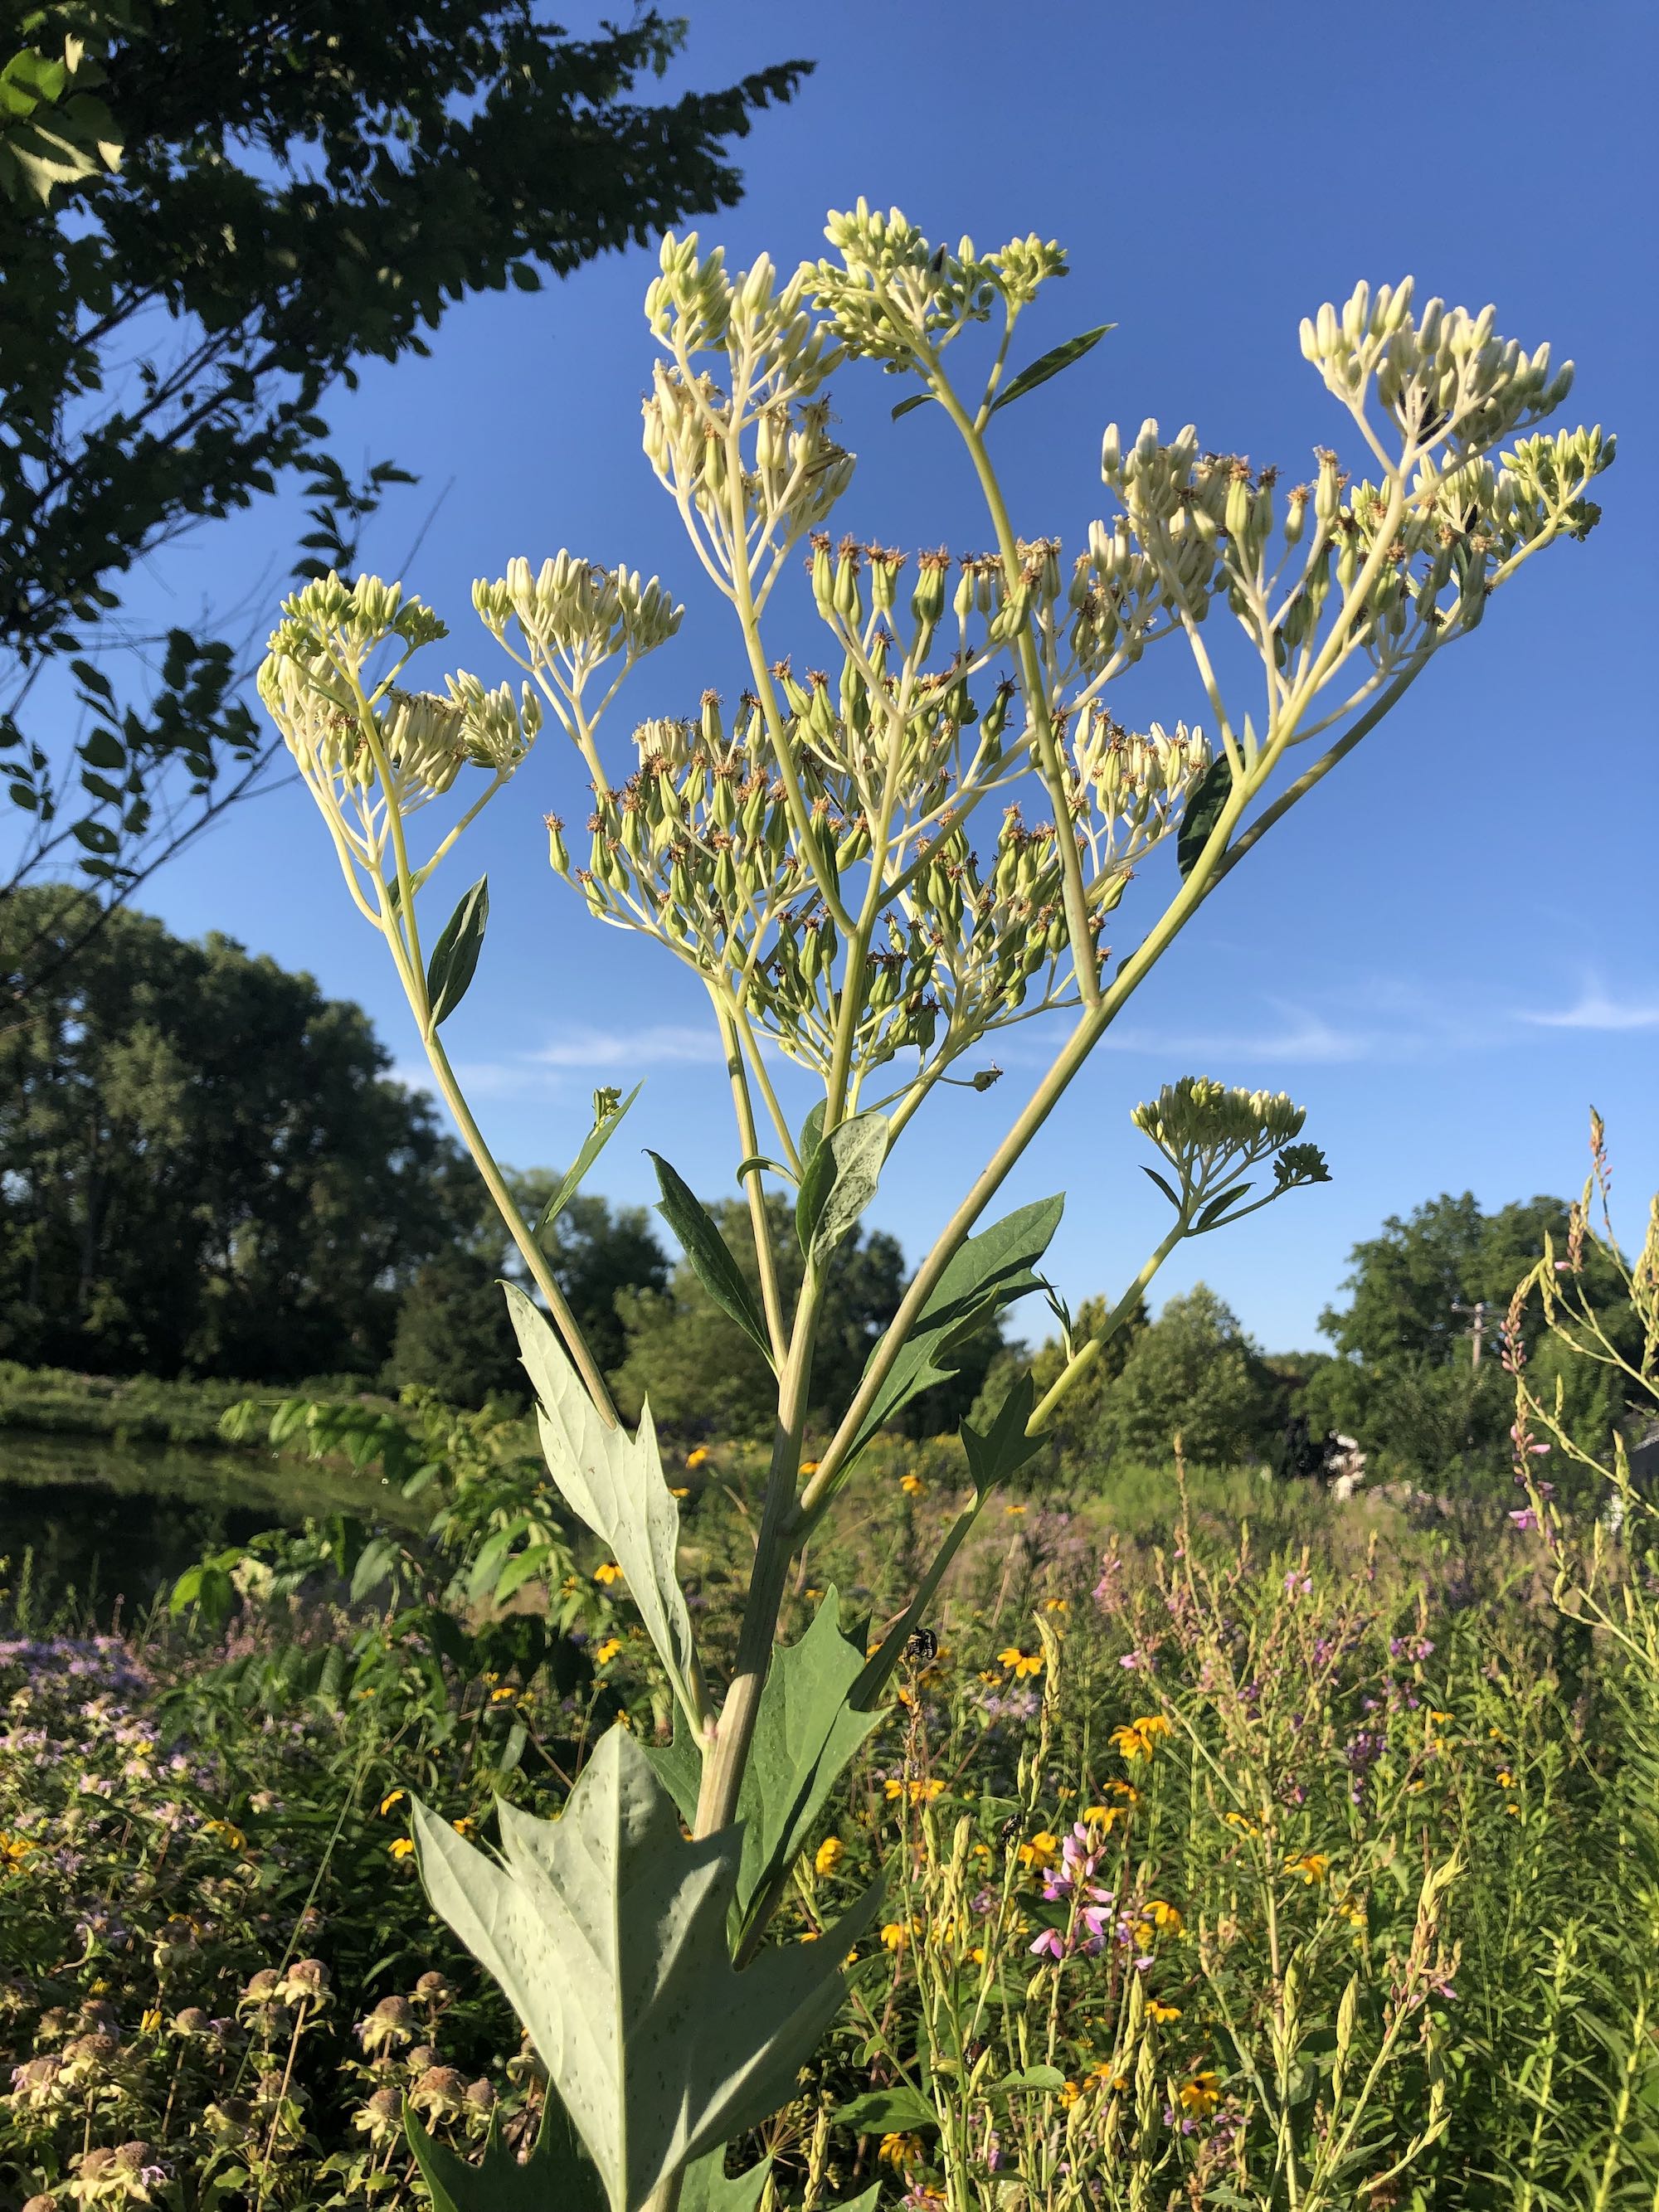 Pale Indian Plantain on banks of Retaining Pond in Madison, Wisconsin on August 1, 2019.